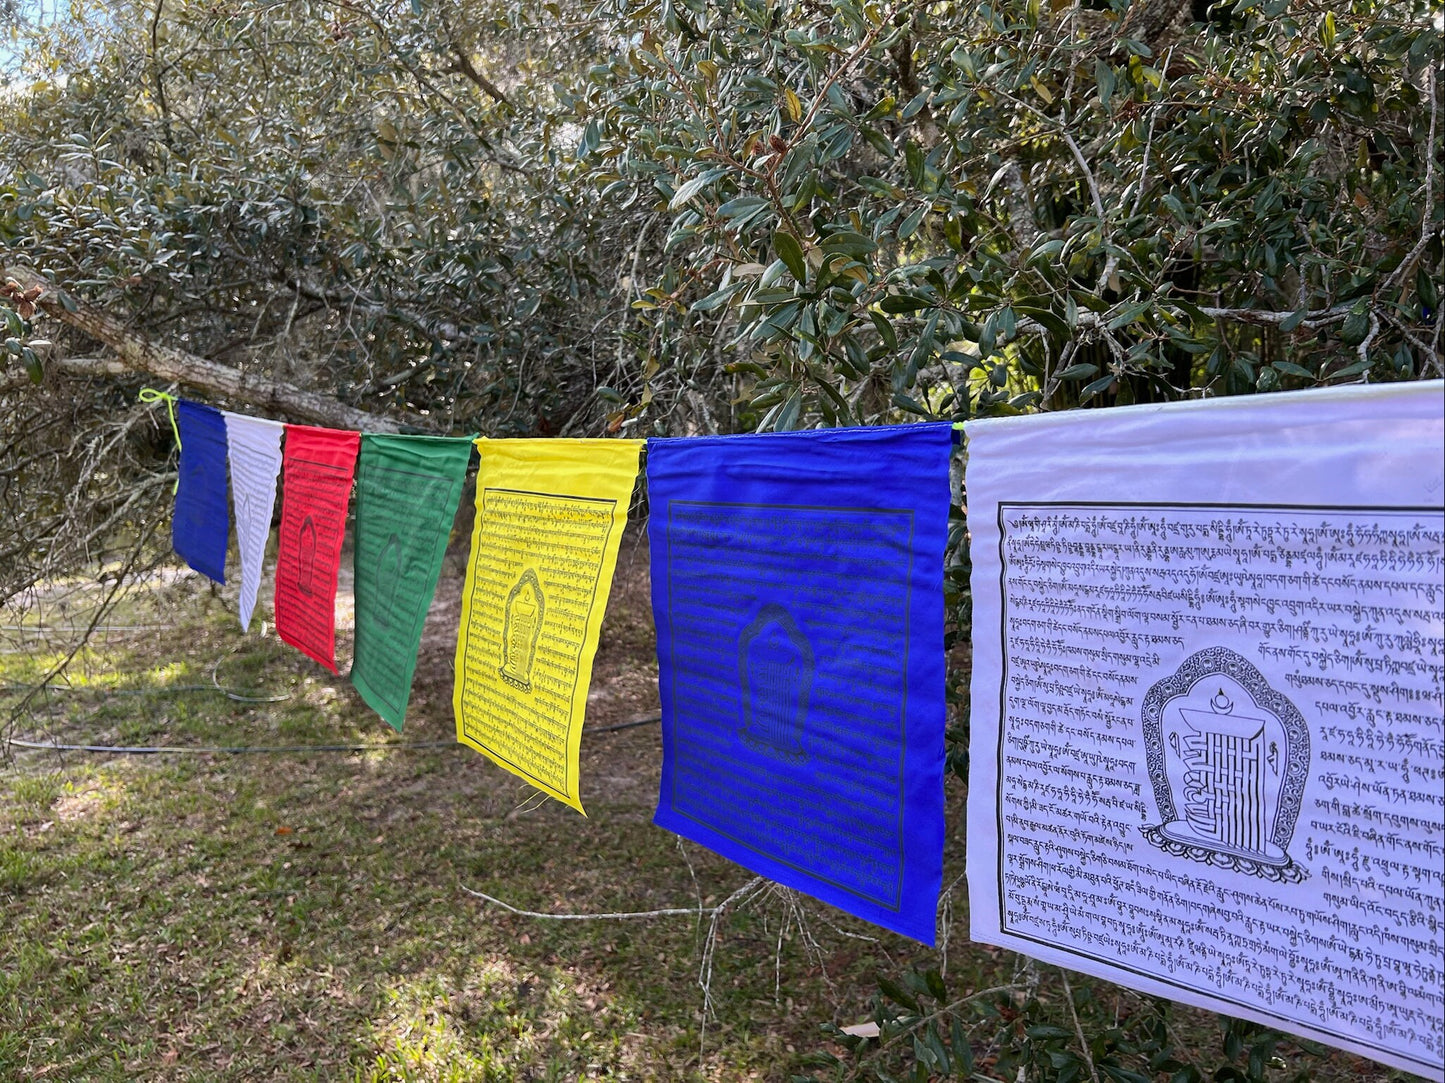 Shimmering strand of Kalachakra prayer flags, 13&quot;x13&quot; from a 25-flag strand. 5 colors, imprinted with prayers & 10-fold seed syllable.